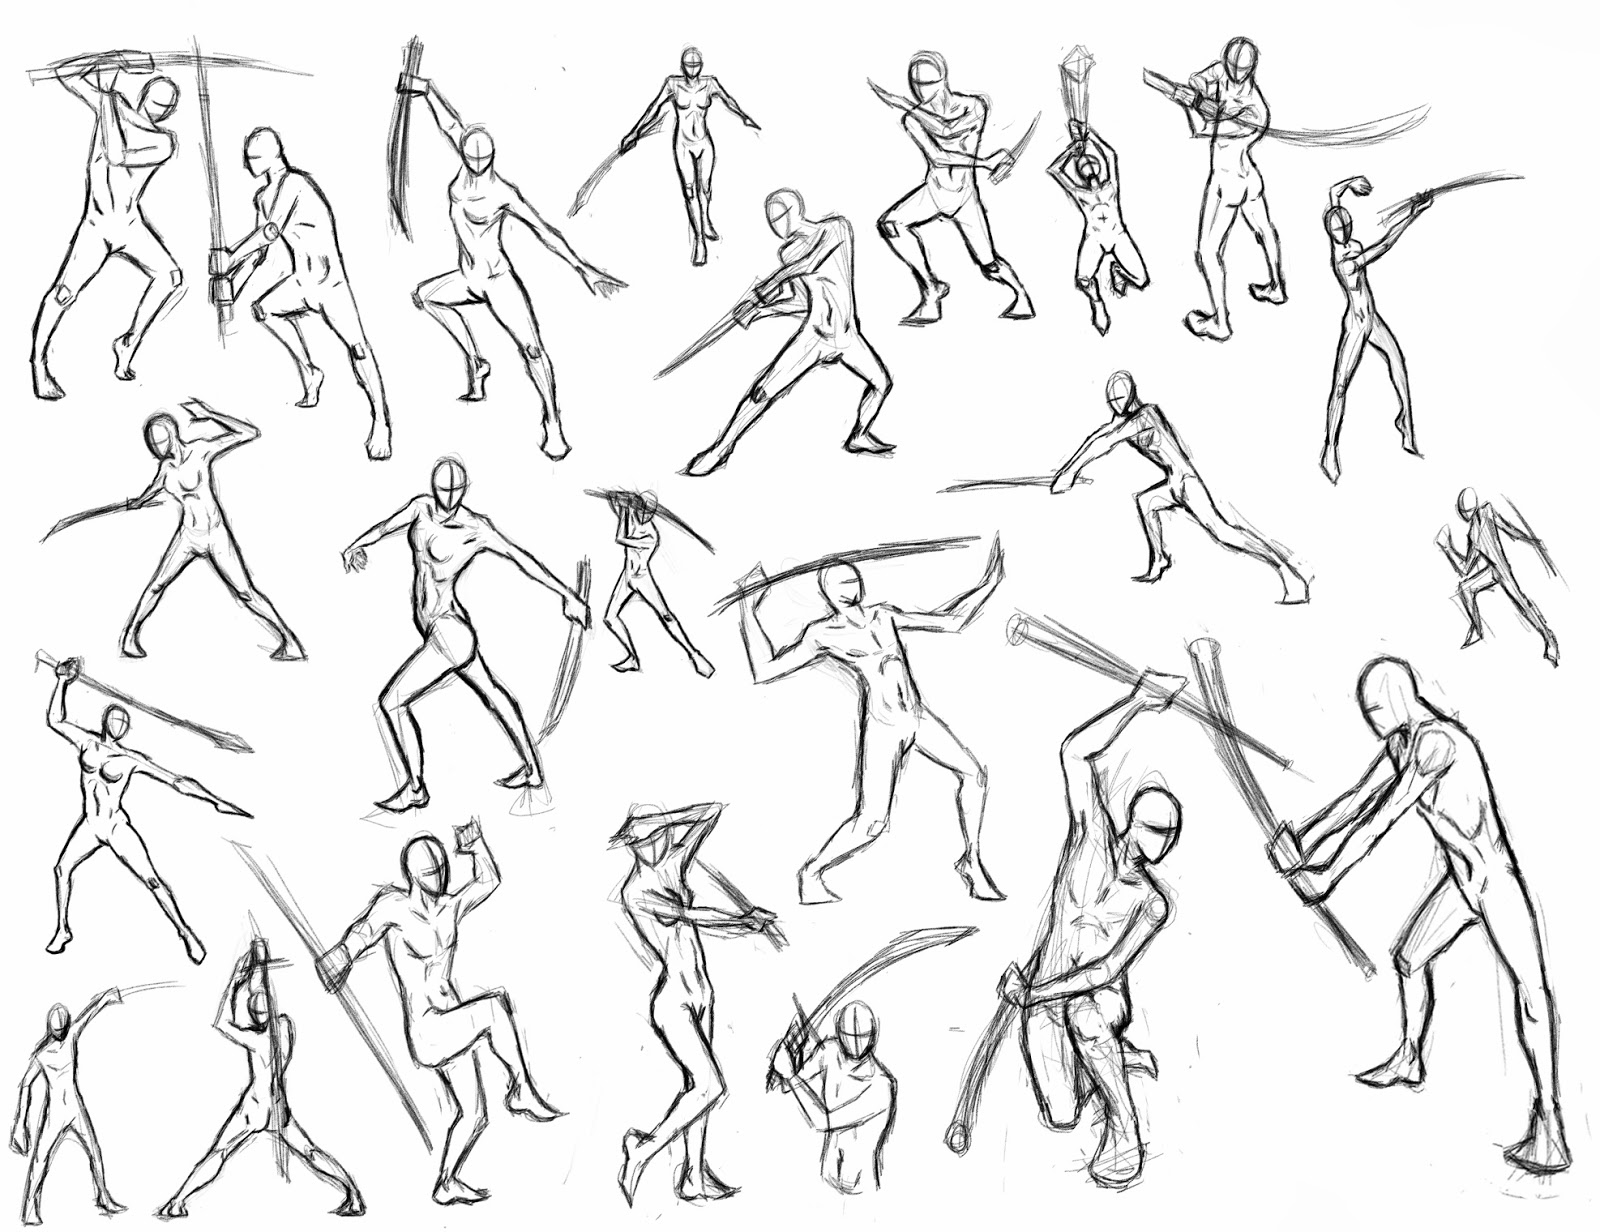  Male Action Poses Drawing Sketch Reference with simple drawing